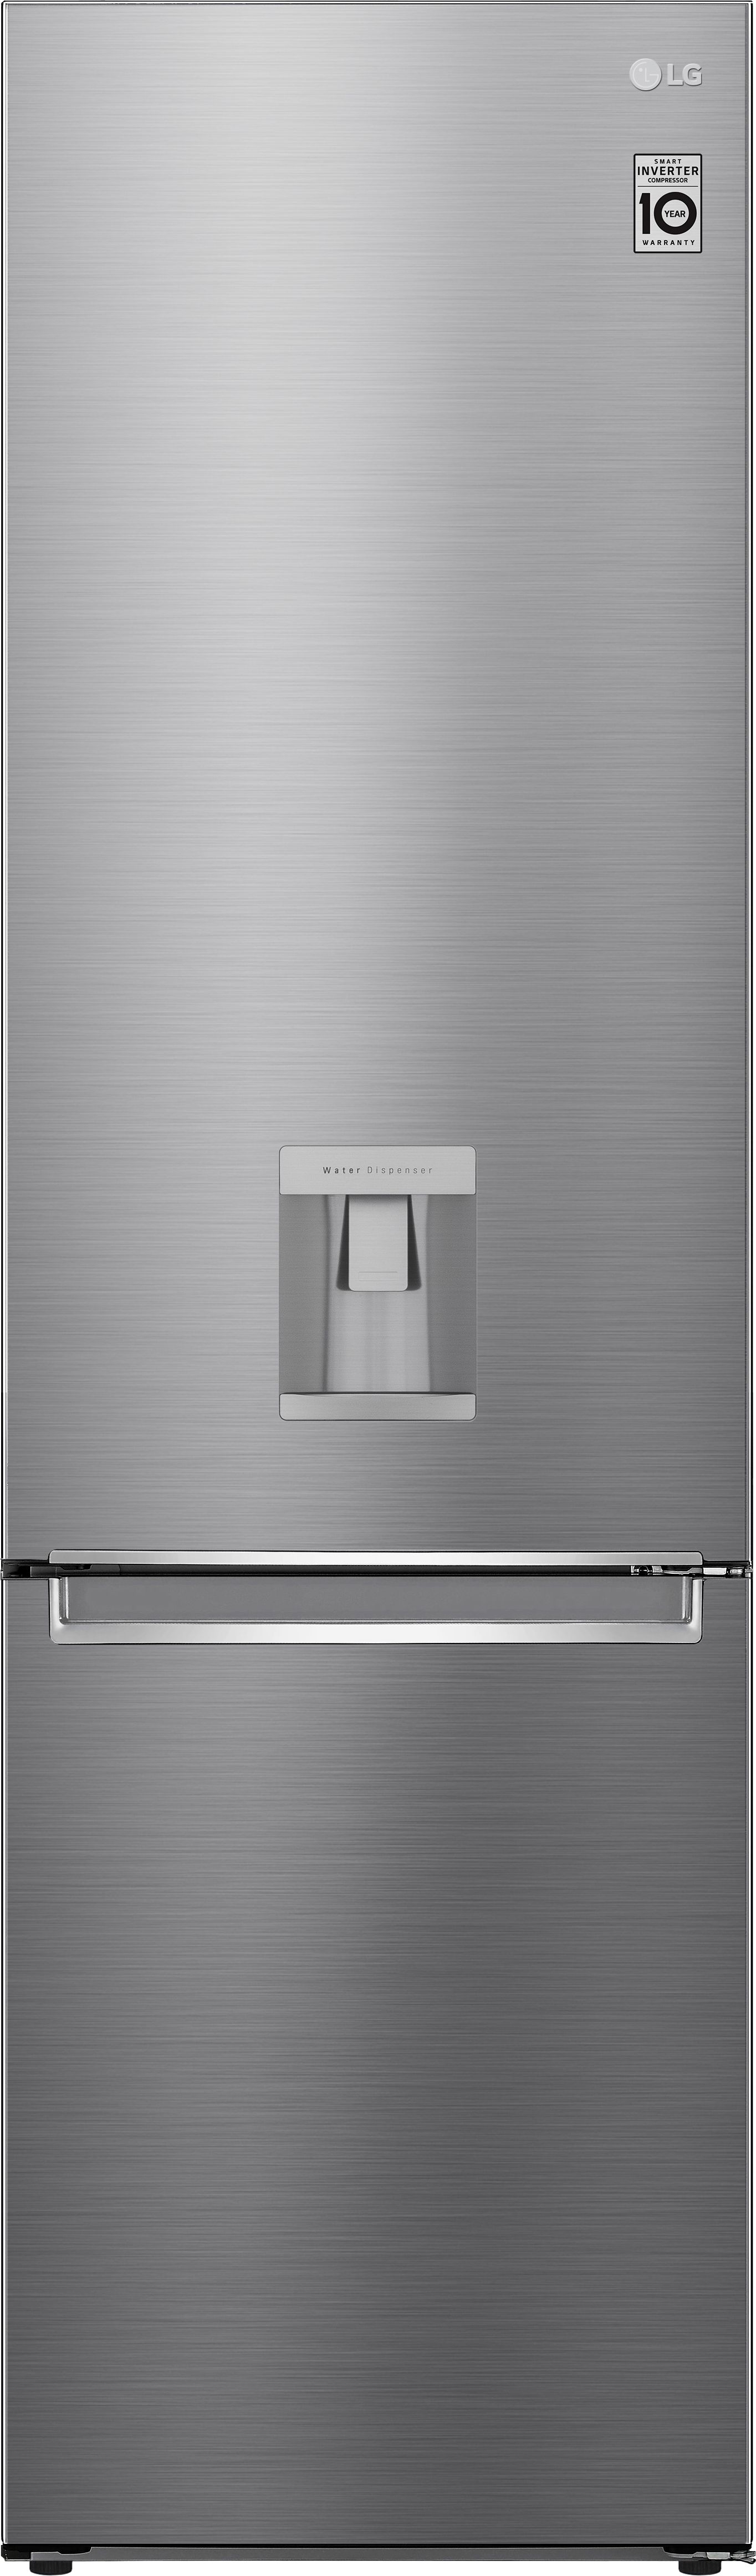 LG NatureFRESH GBF62PZGGN 70/30 Frost Free Fridge Freezer - Silver Steel - D Rated, Silver